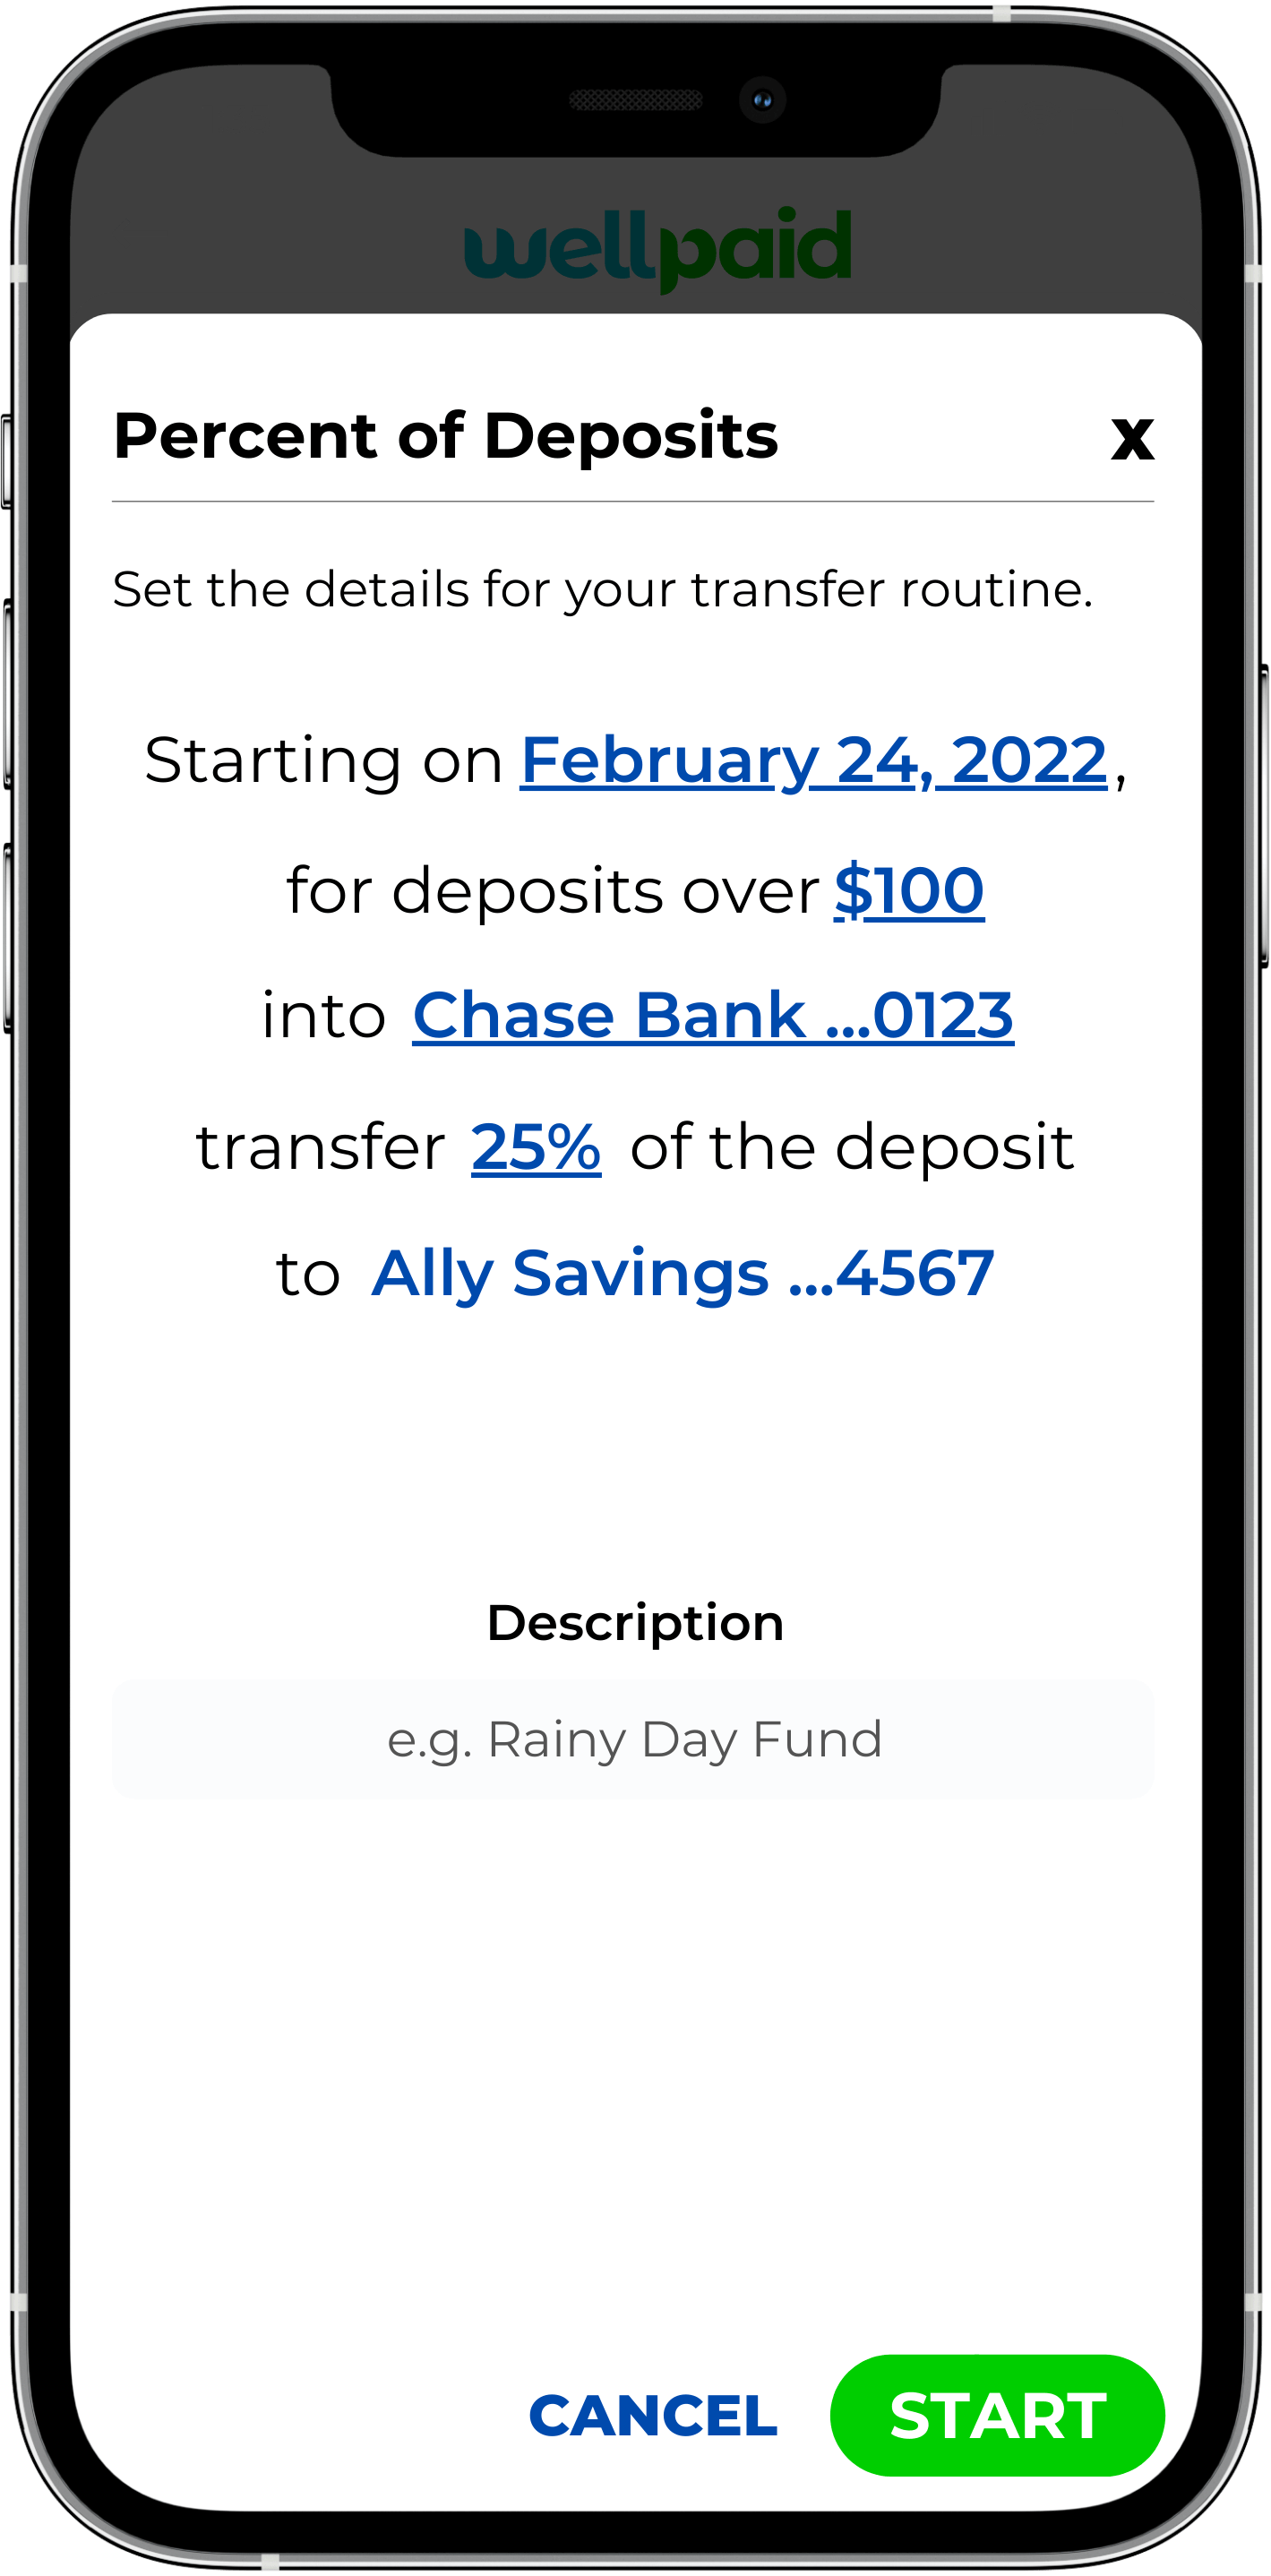 WellPaid Recurring Transfers